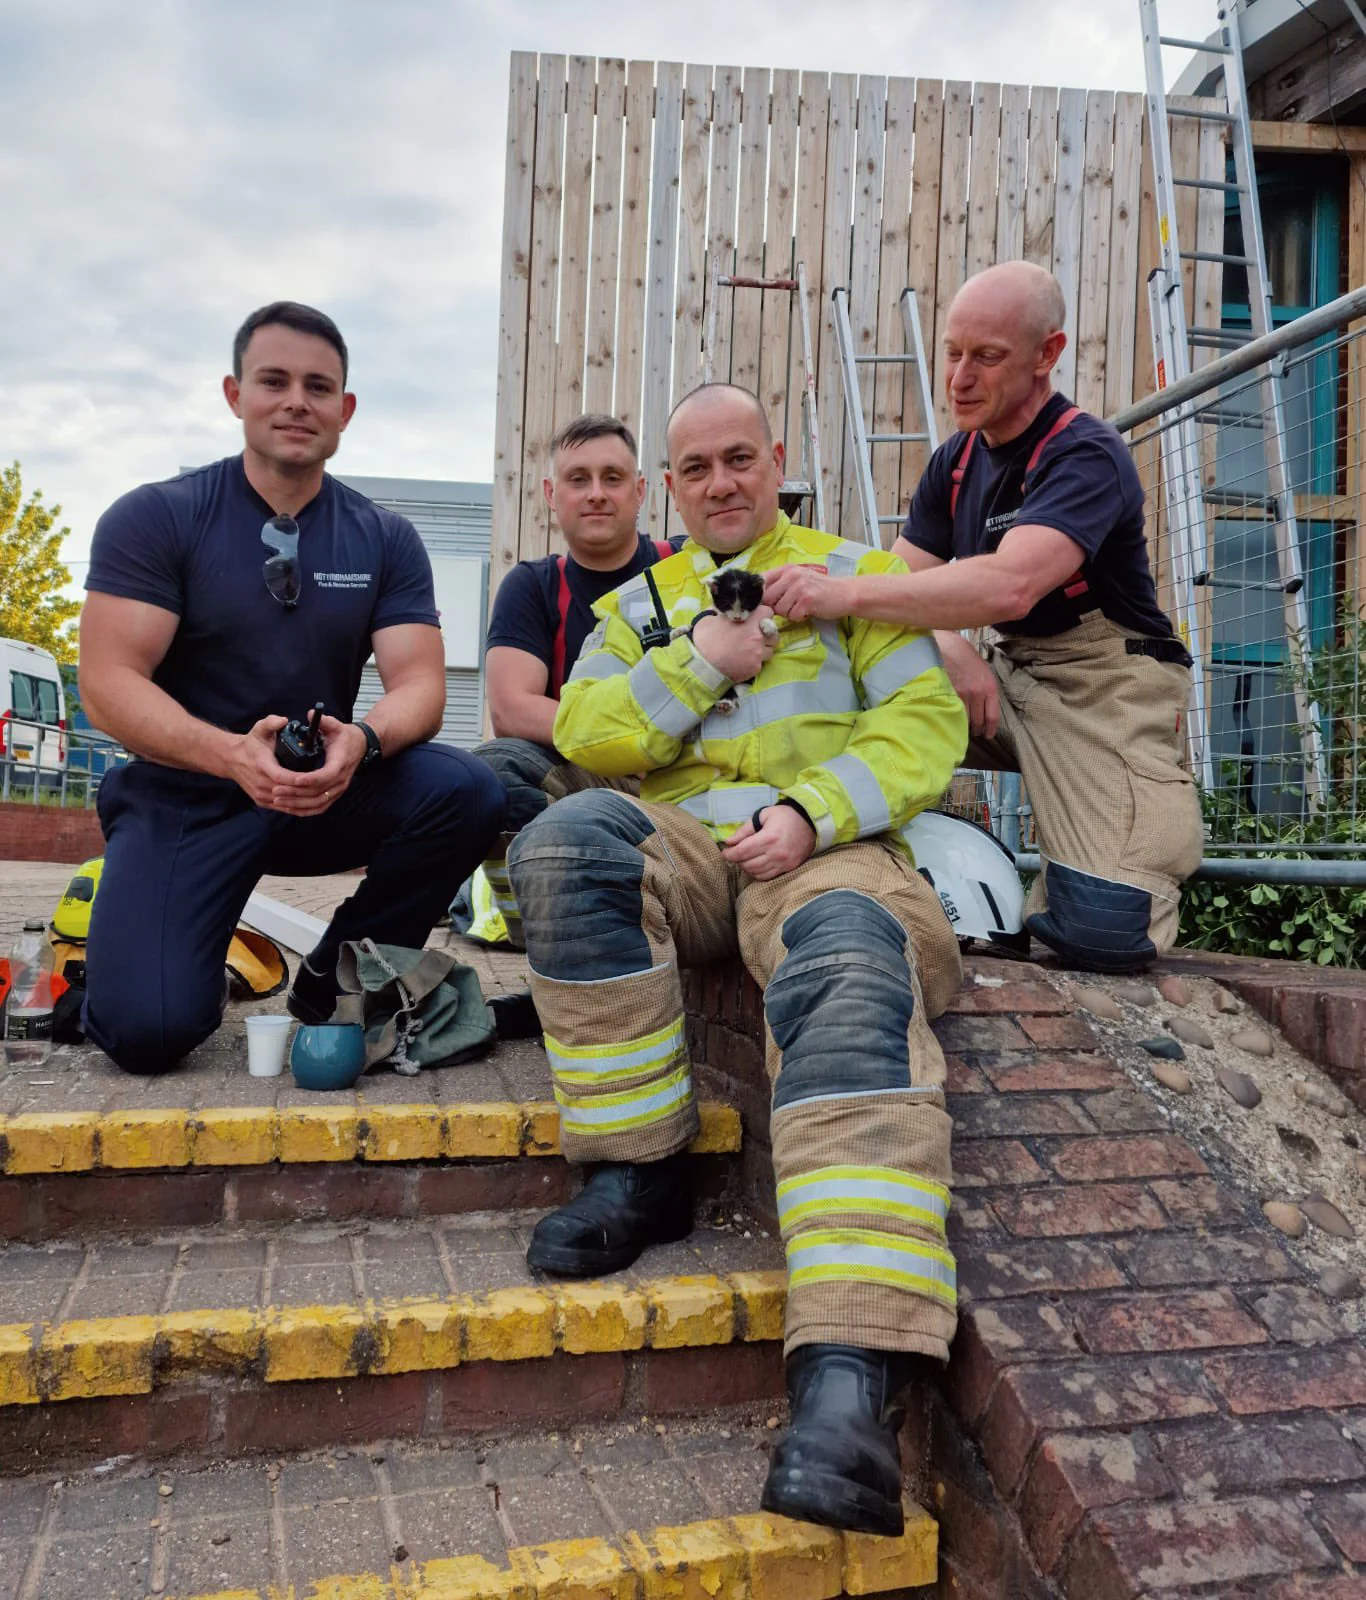 four firefighters sit on steps, the one in the middle holds a tiny black and white kitten, while other leans over to stroke the kitten